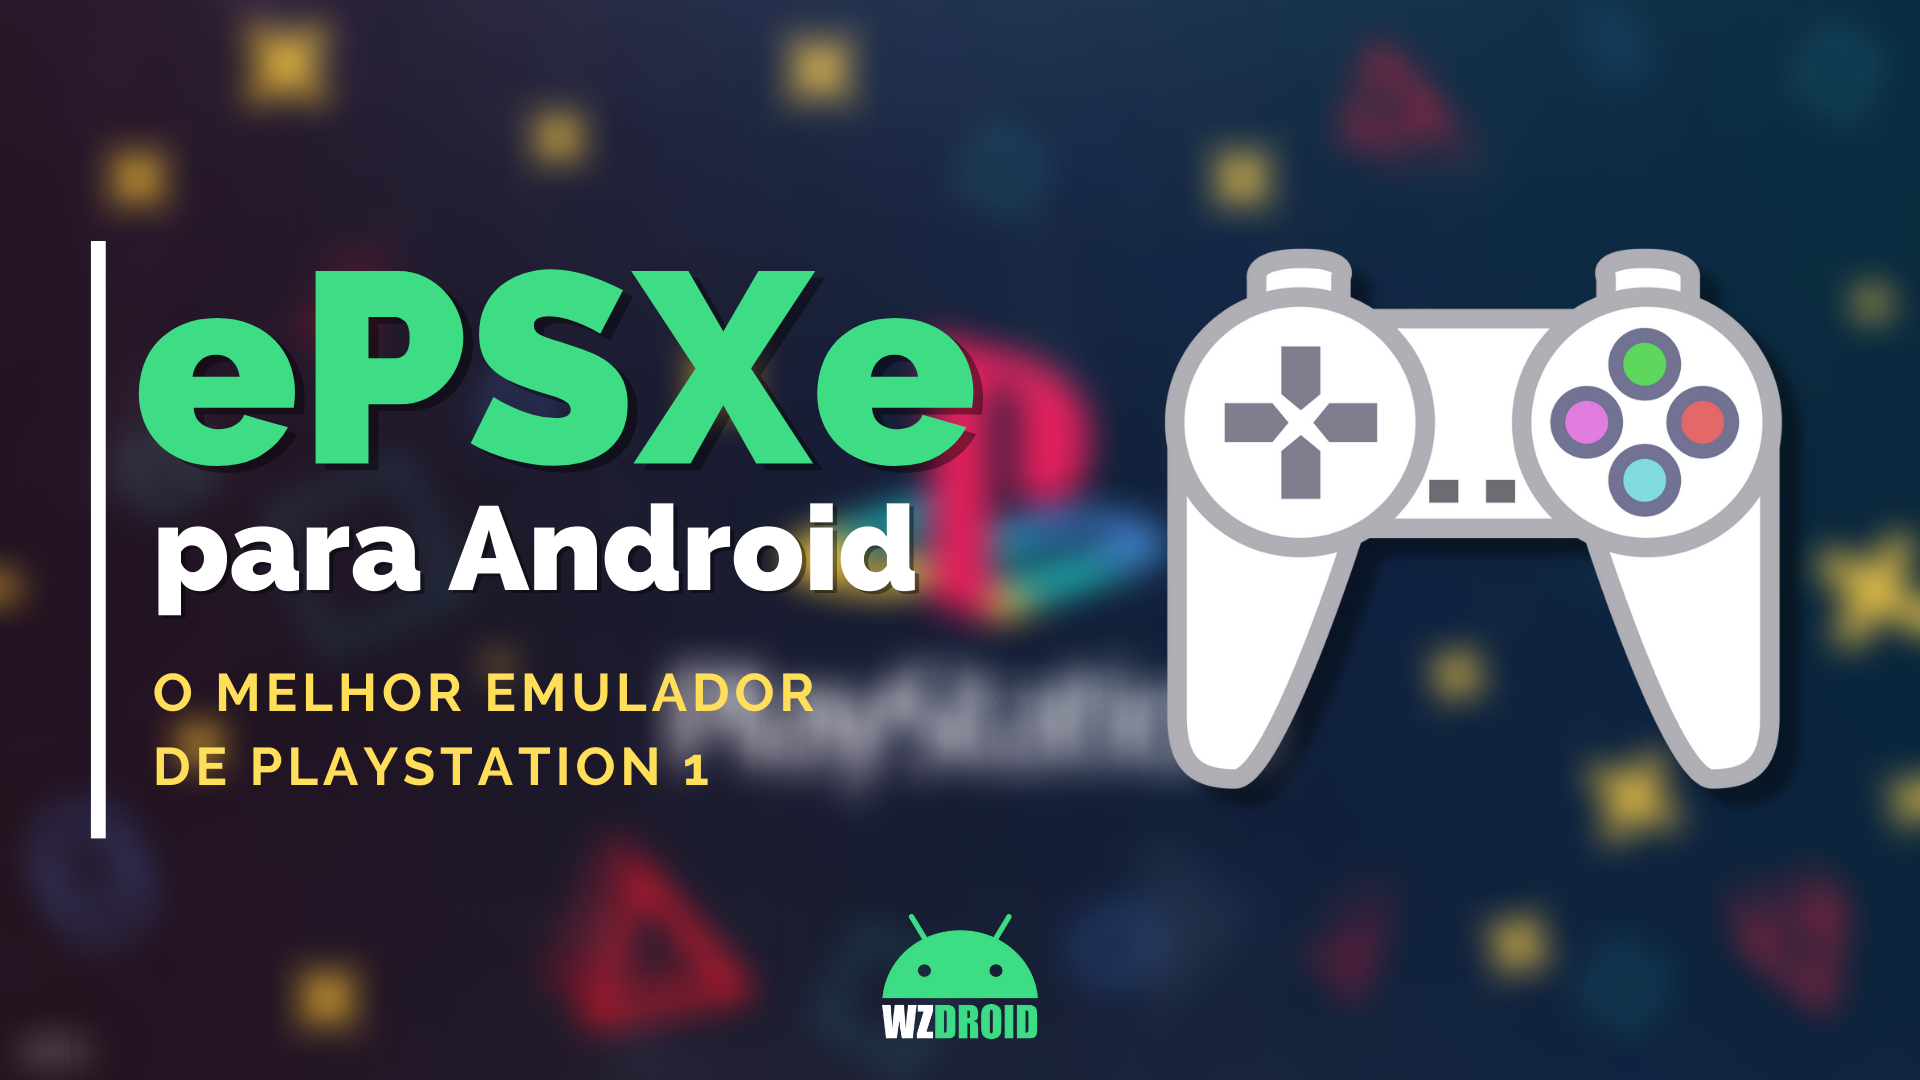 EPSXe For Android